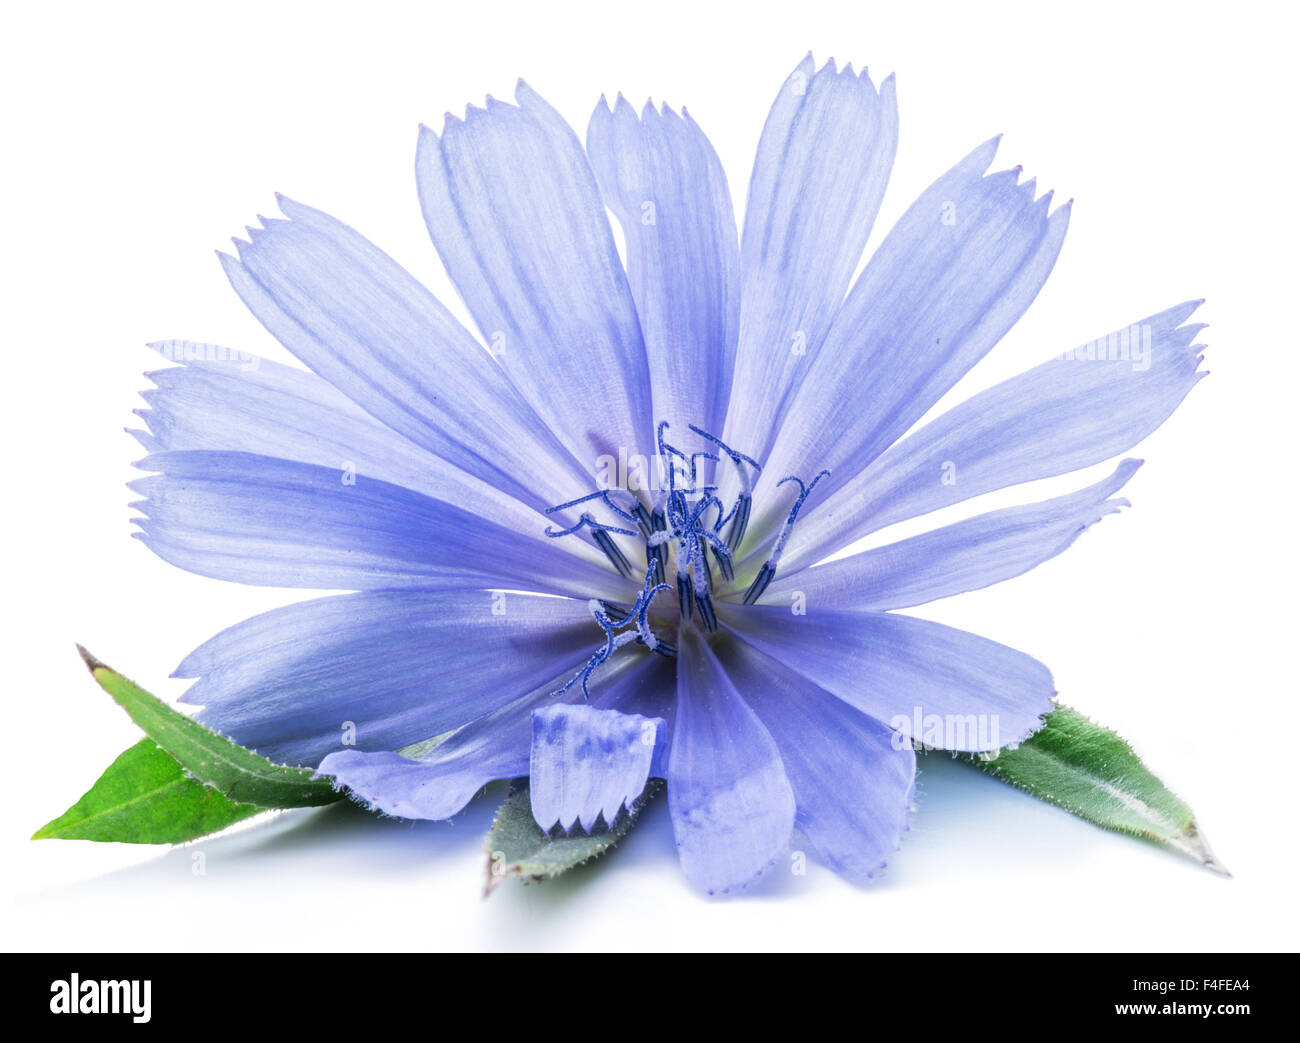 Cichorium intybus - common chicory flowers isolated on the white background. Stock Photo